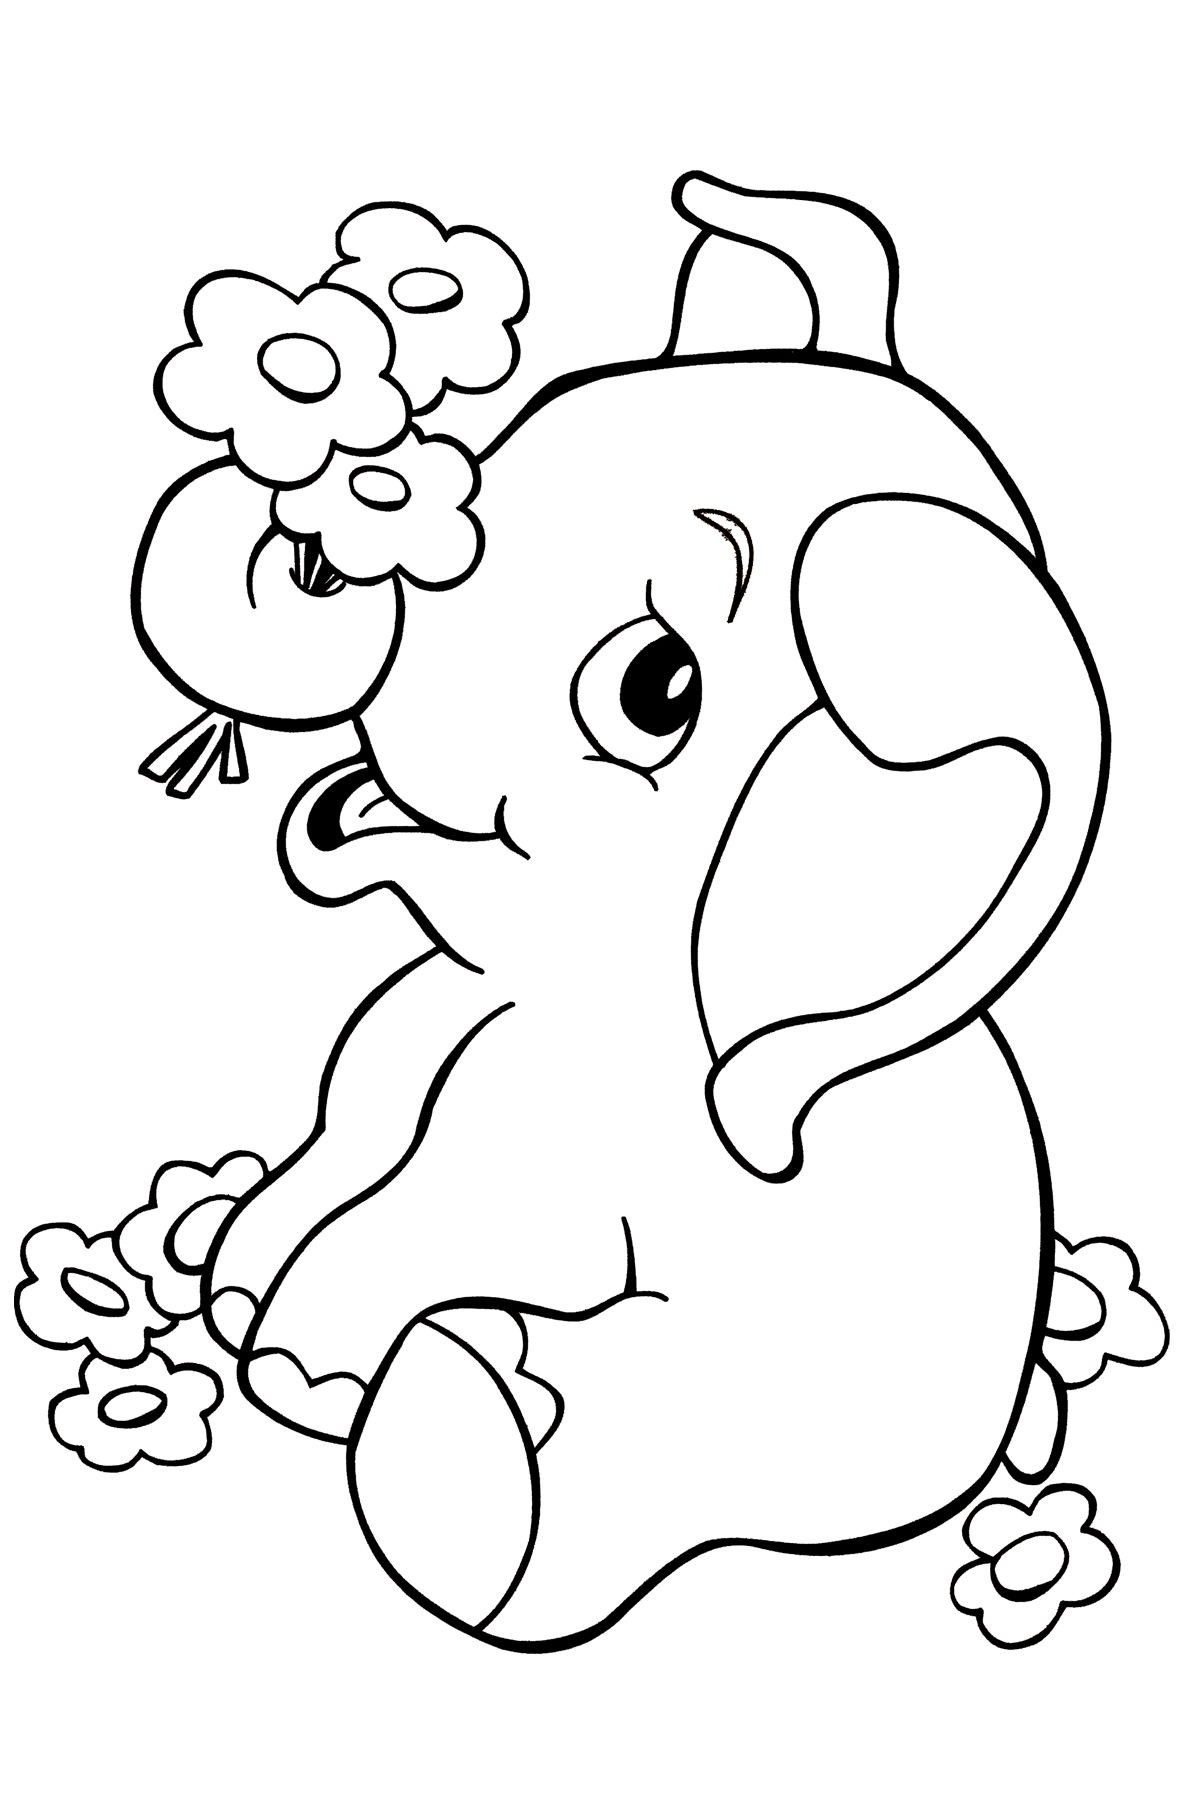 Coloring-Pages-Kids
 Jungle Coloring Pages Best Coloring Pages For Kids